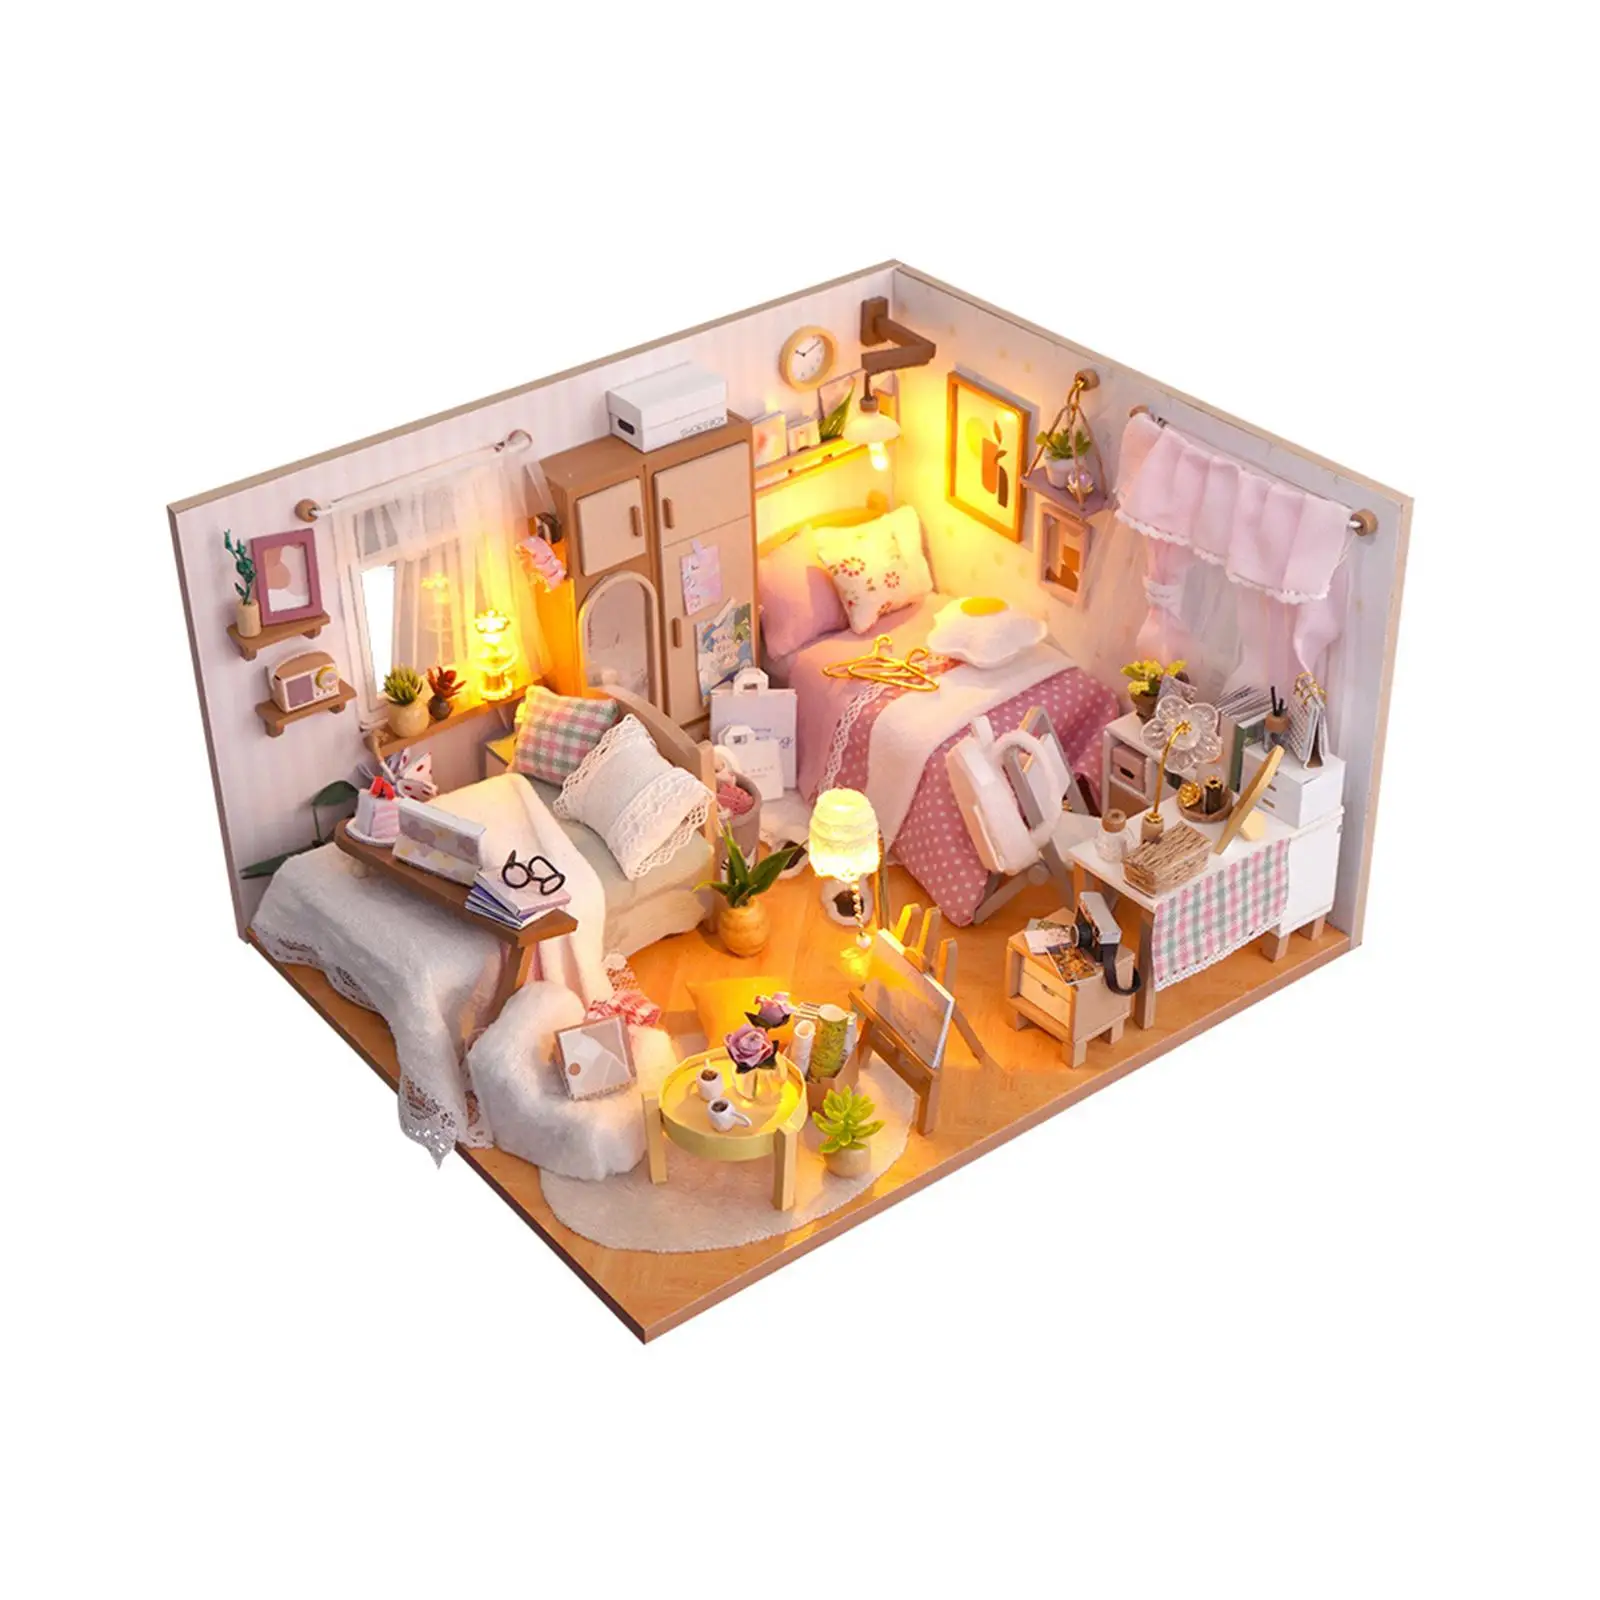 3D Wooden Miniature Dollhouse Kits with Furniture and Ornaments for Boys Girls Artwork Easy to Assemble Fashion Creative Bedroom